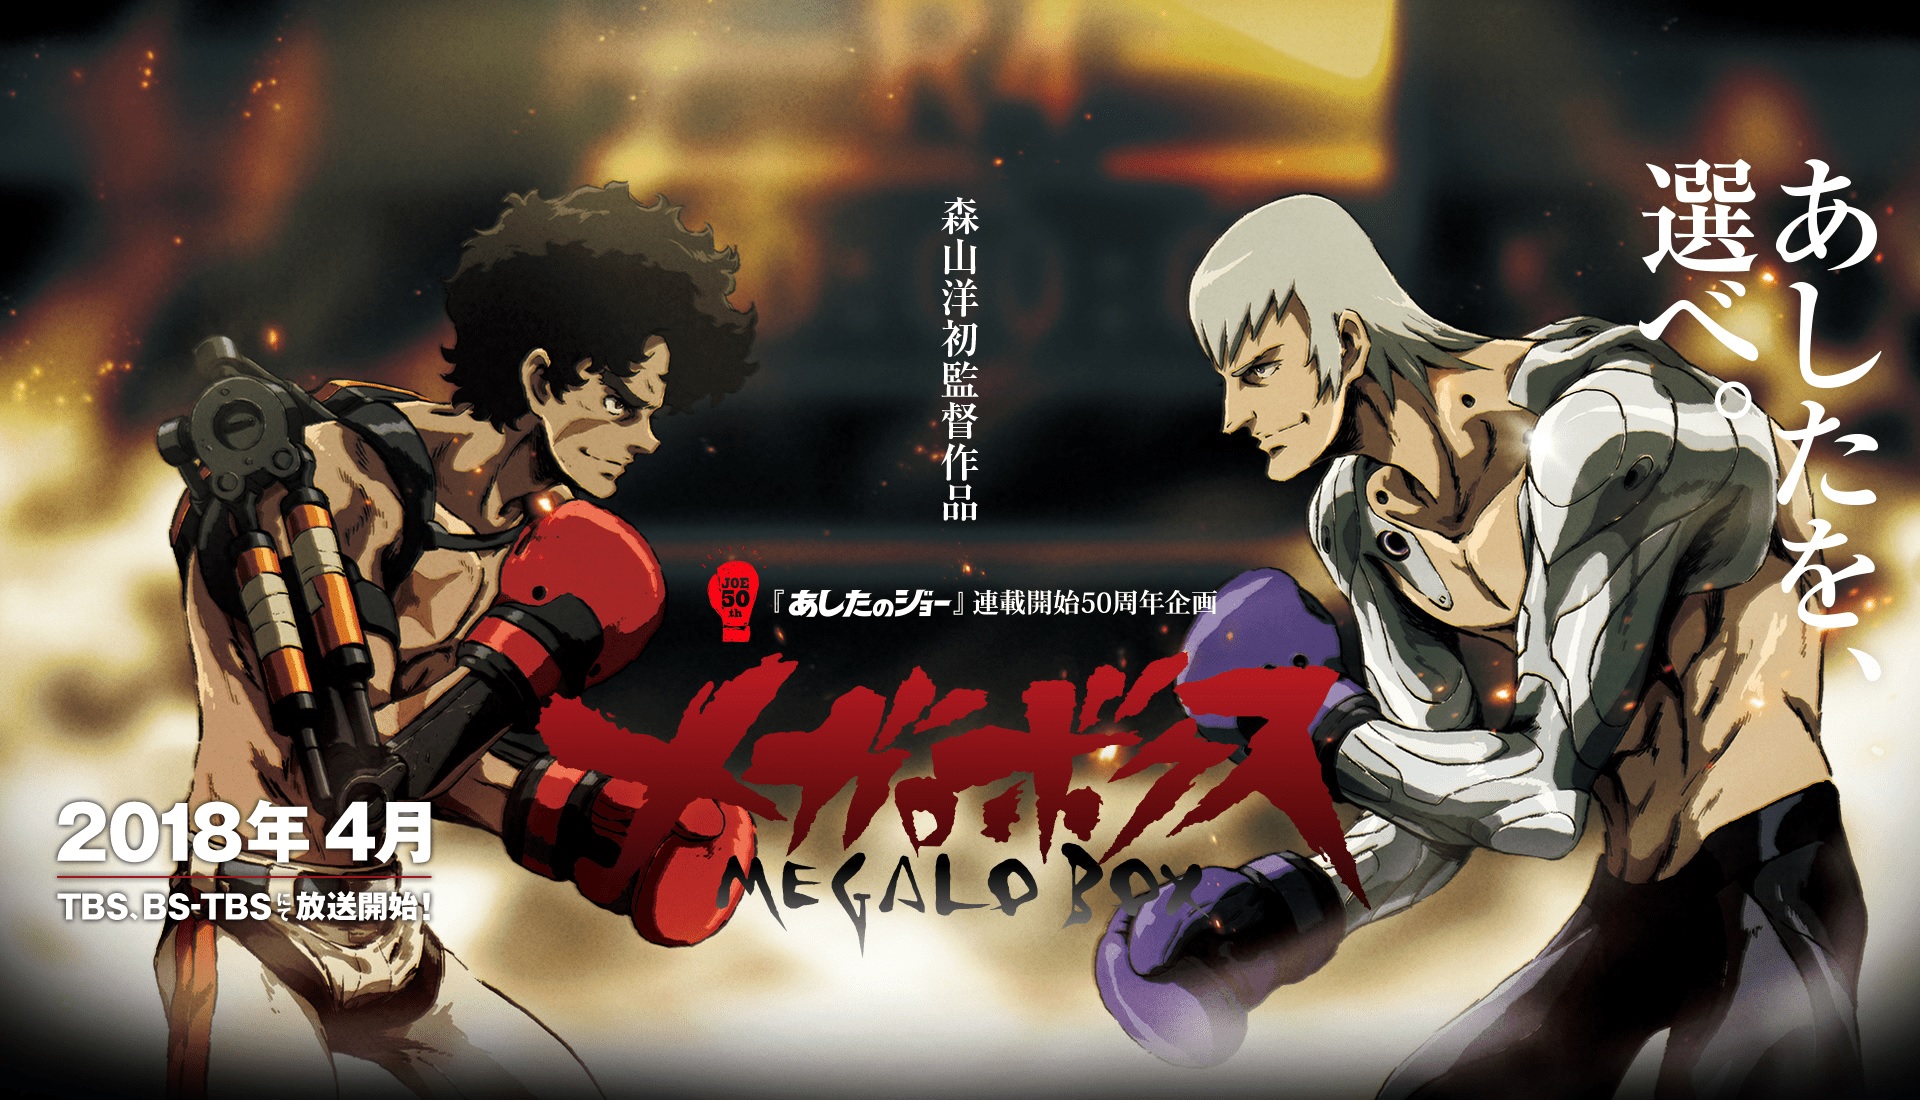 Download Megalo Box wallpapers for mobile phone free Megalo Box HD  pictures